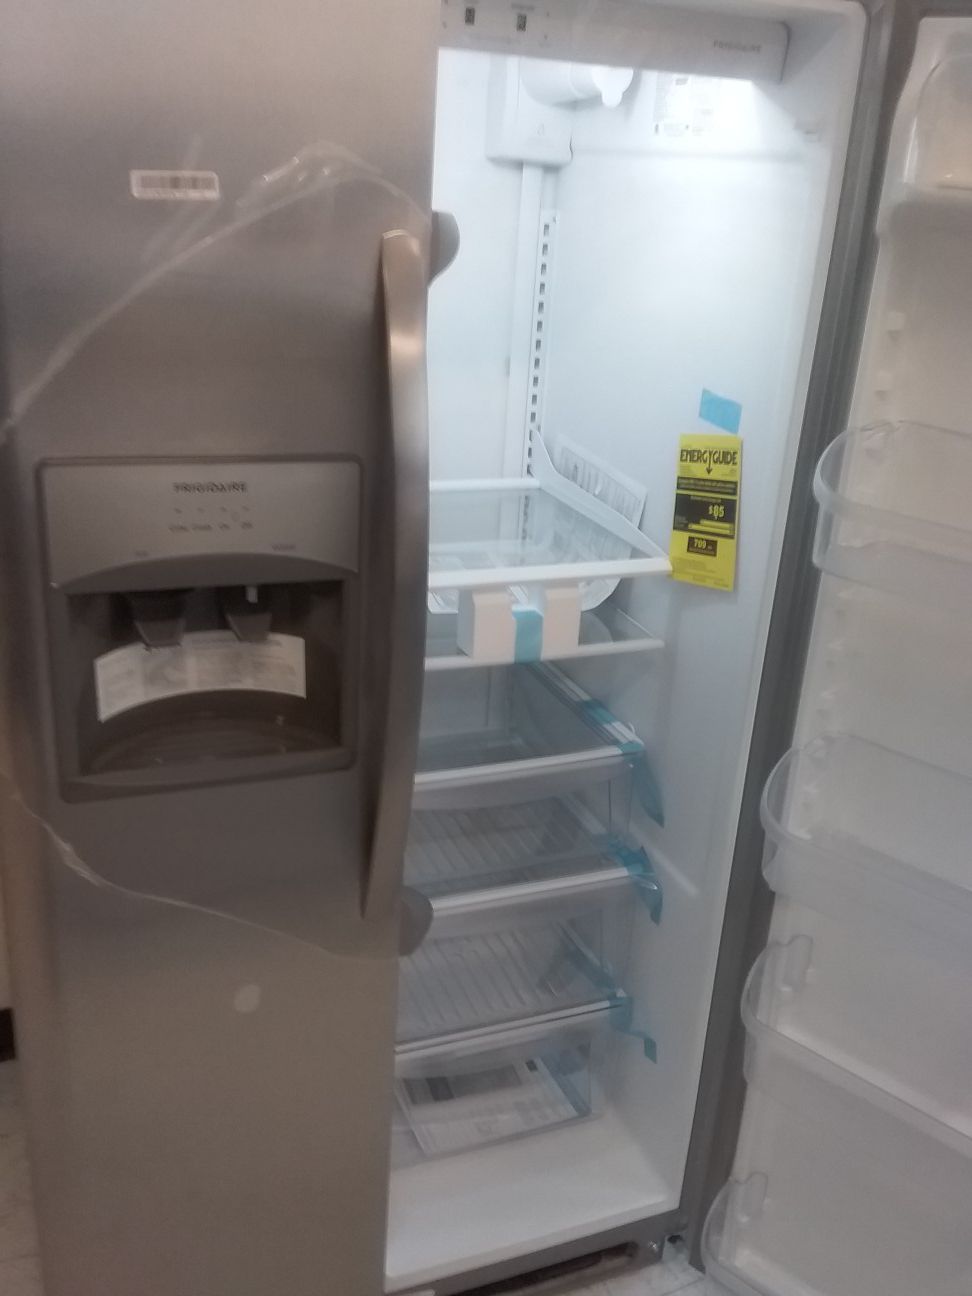 Frigidaire side by side stainless steel refrigerator new scratch and dents good condition 6month warranty